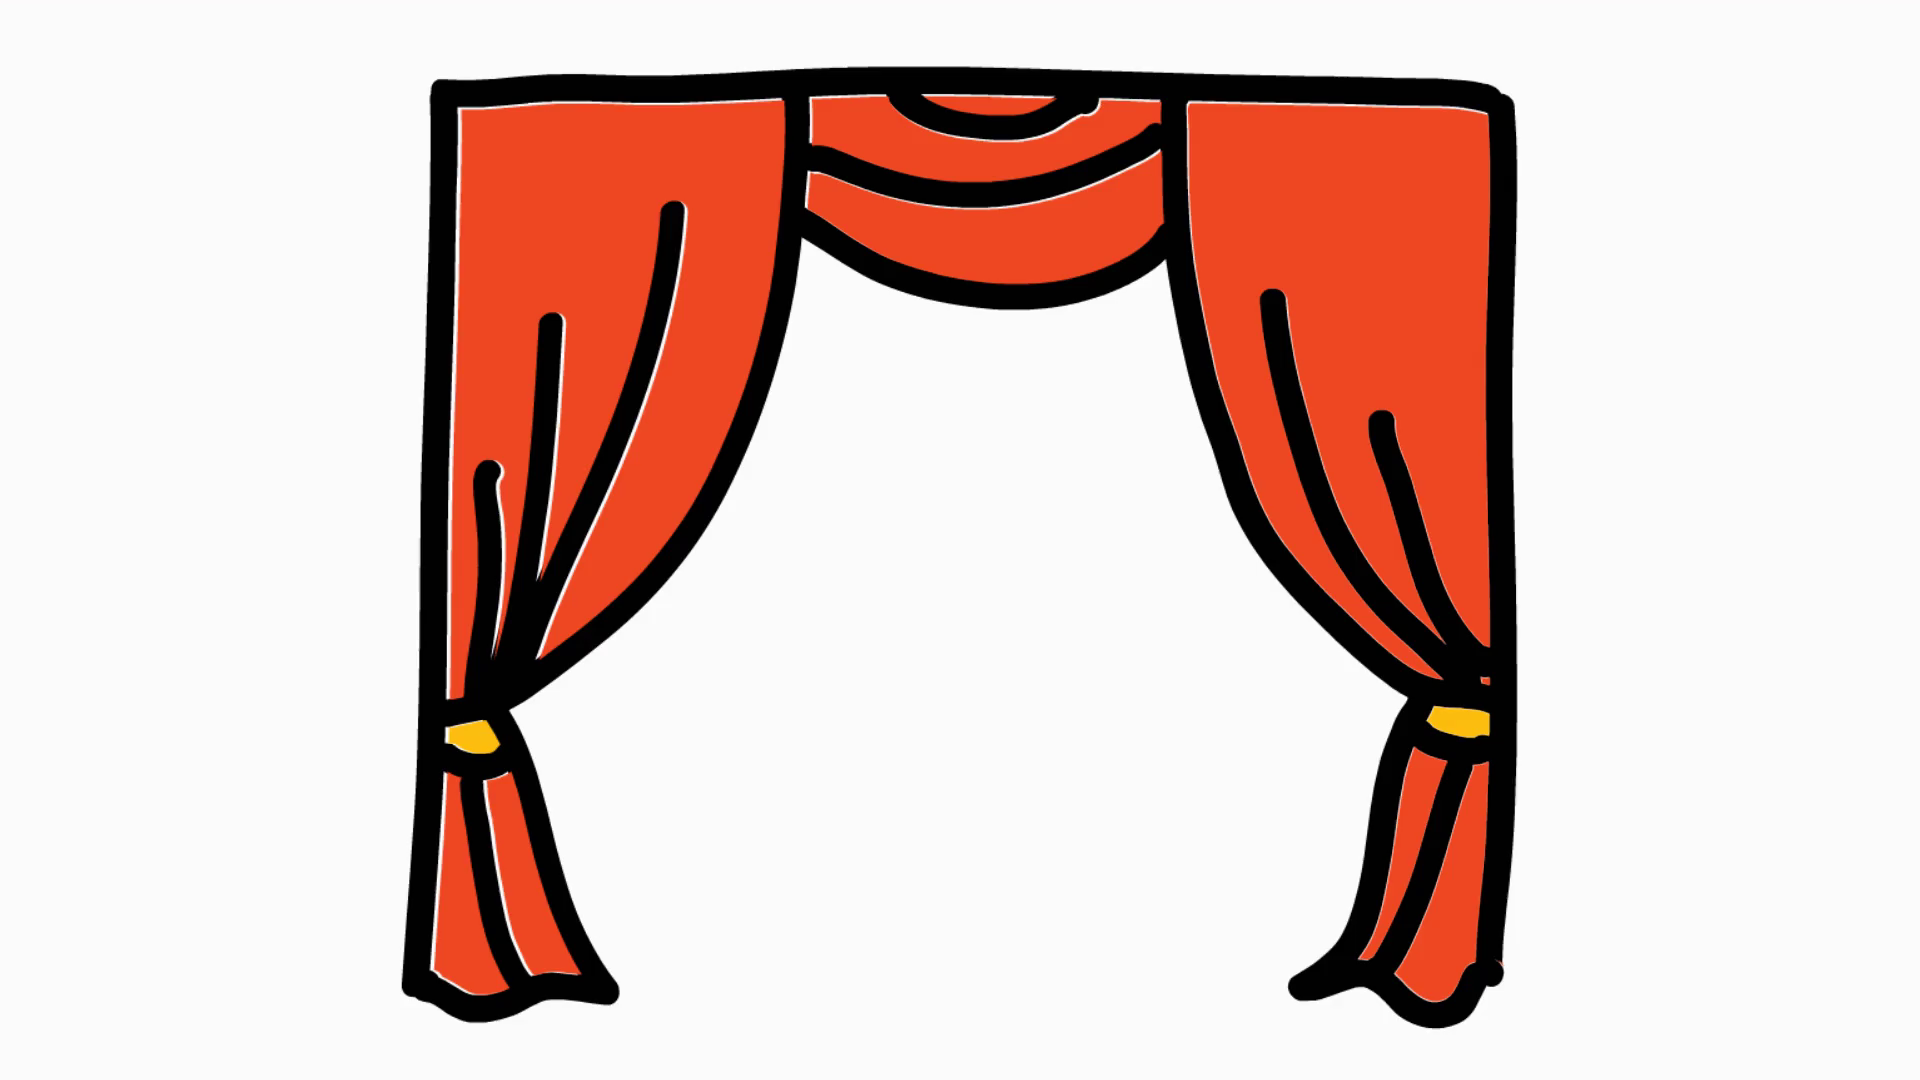 Curtain Clipart Animated and other clipart images on Cliparts pub™